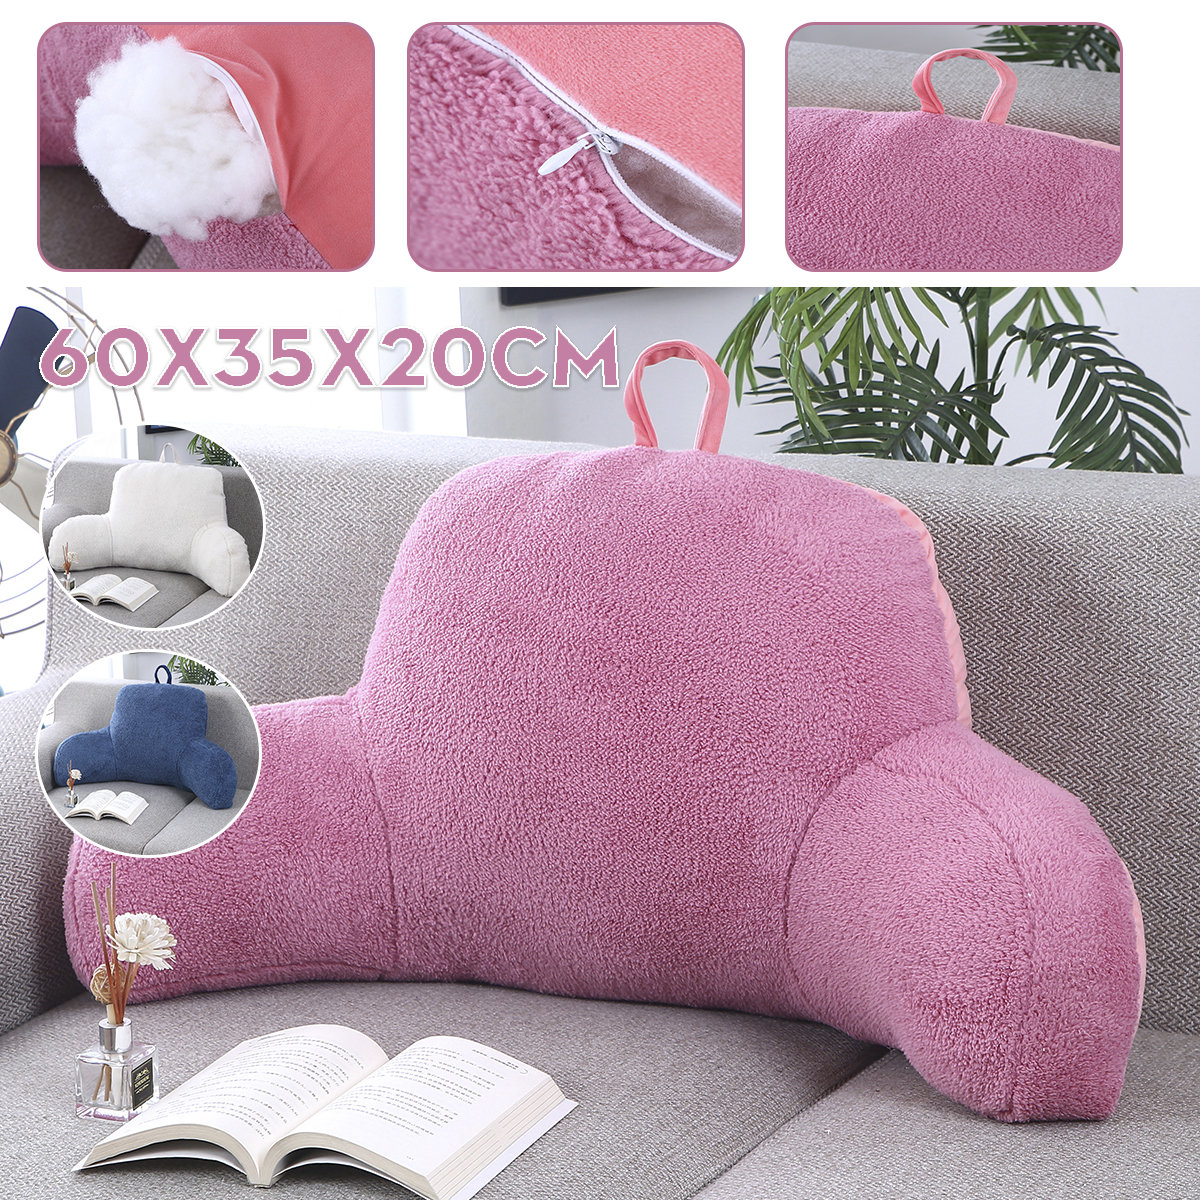 2362inch-PP-Cotton-Filling-Backrest-Pillow-Bed-Cushion-Support-Reading-Back-Rest-Arms-Chair-For-Home-1812076-1